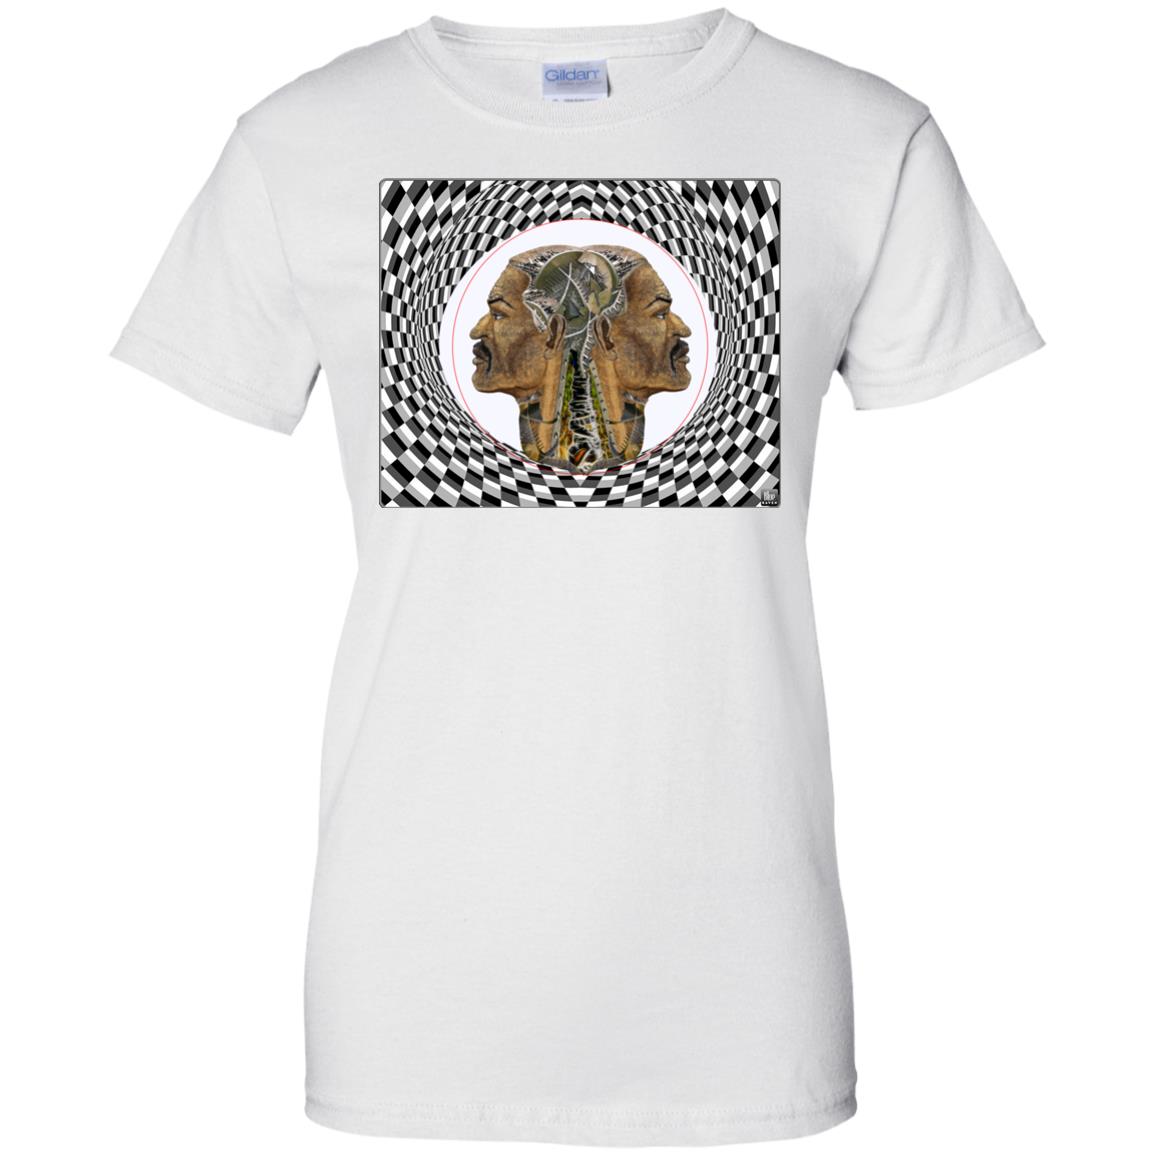 MAN IN THE MACHINE - Women's Relaxed Fit T-Shirt